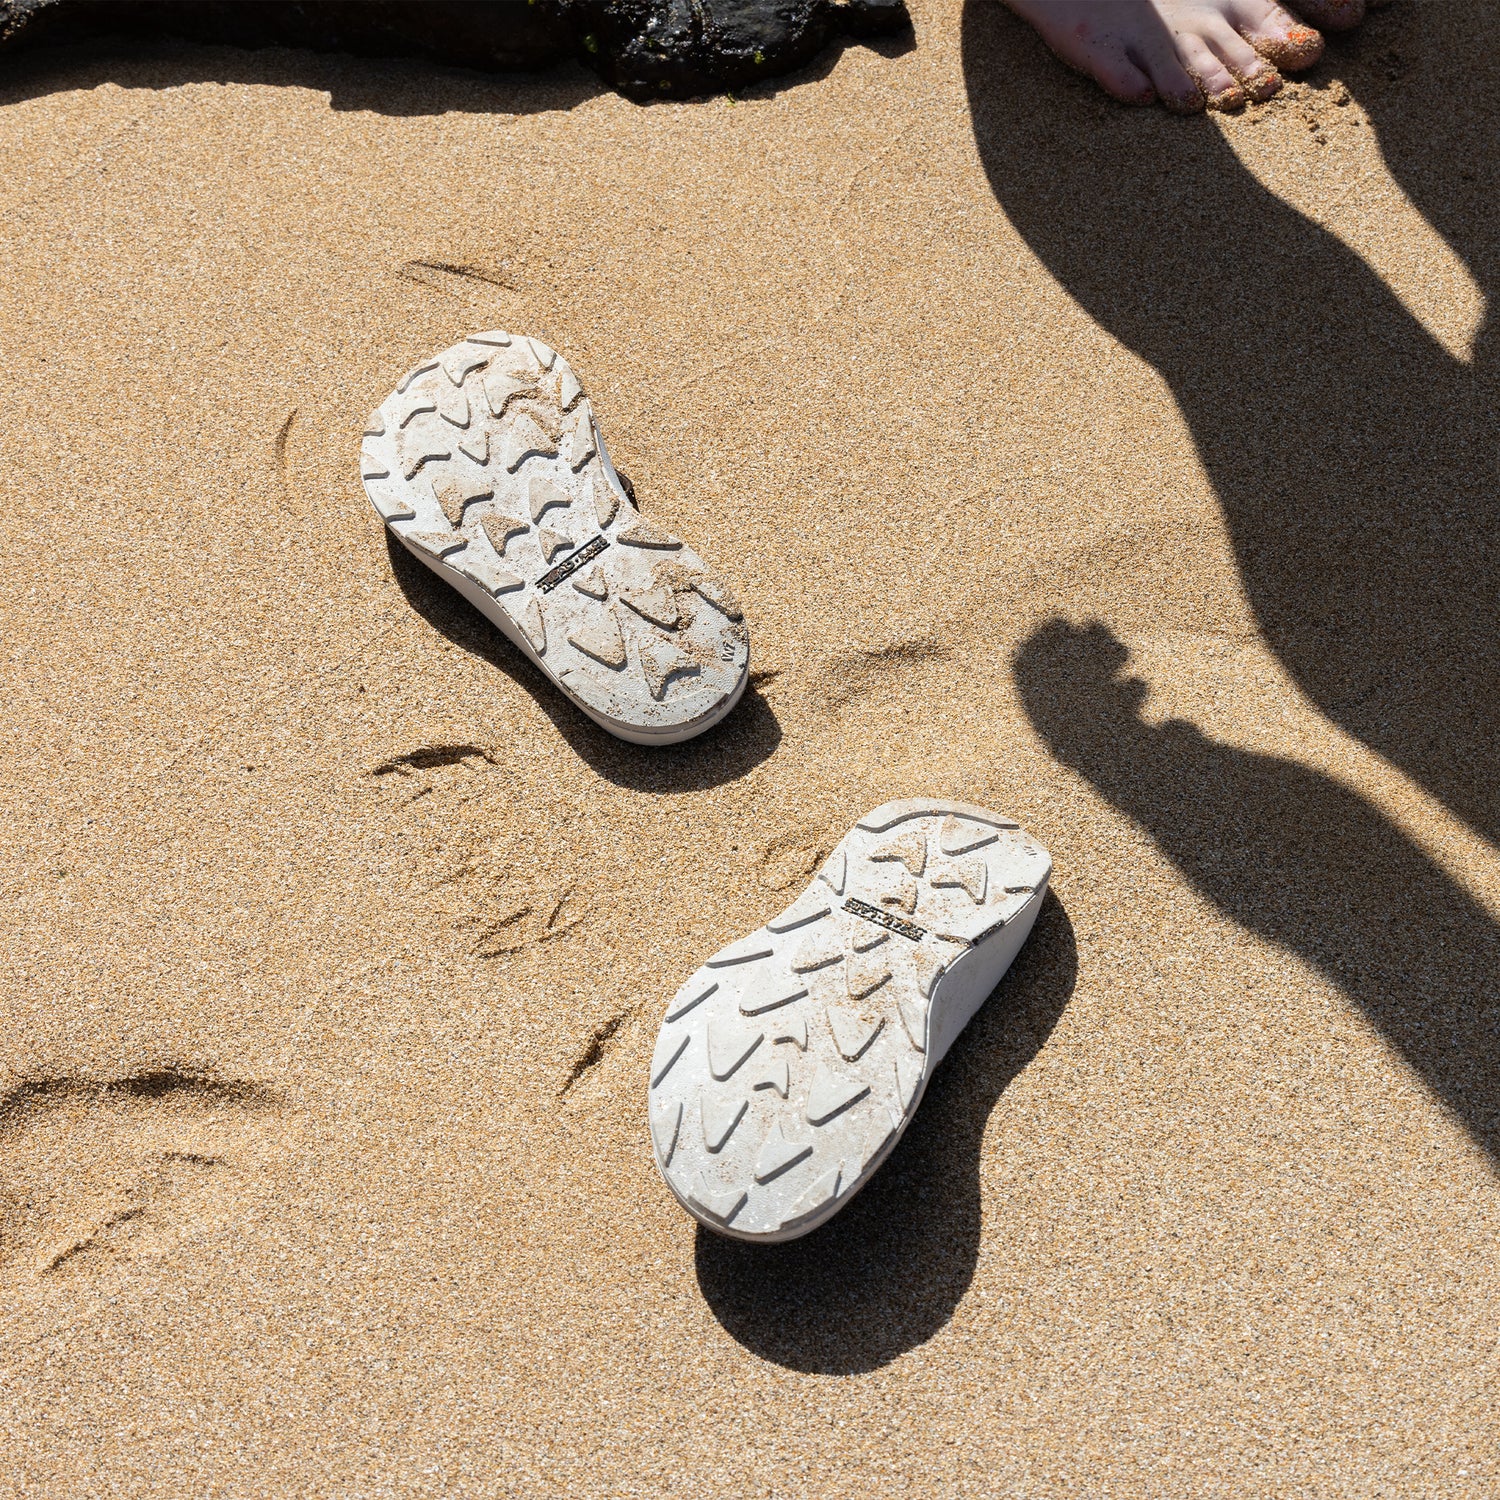 A pair of Orleans Leather sandals displayed on the sand at a beach